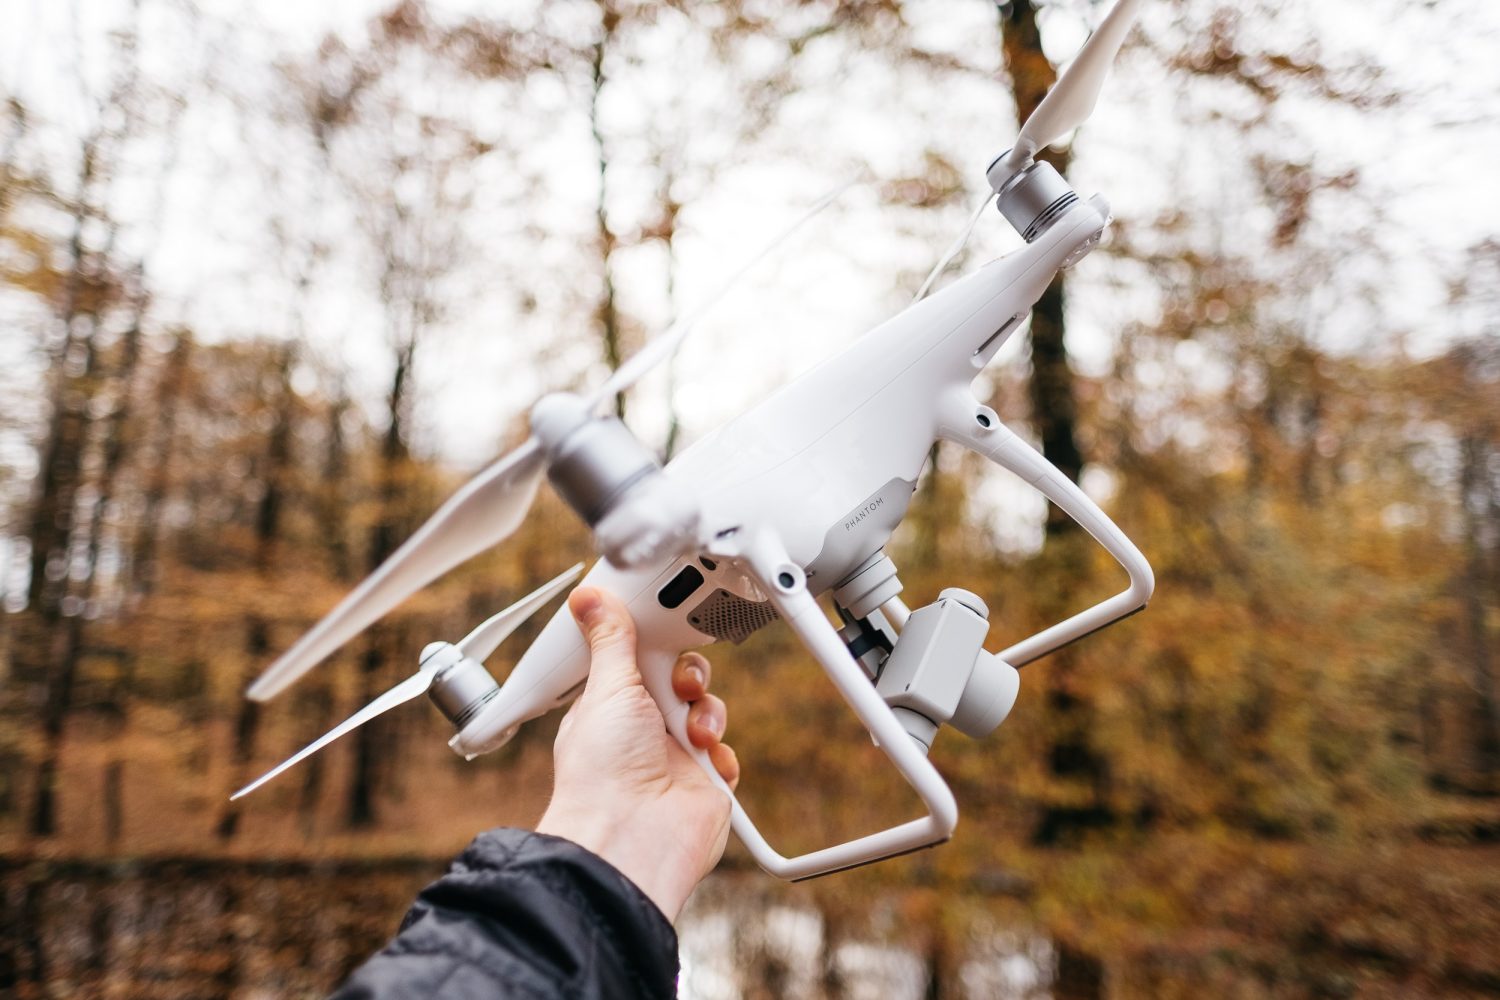 Can hackers seize control of your DJI drone with this trick?